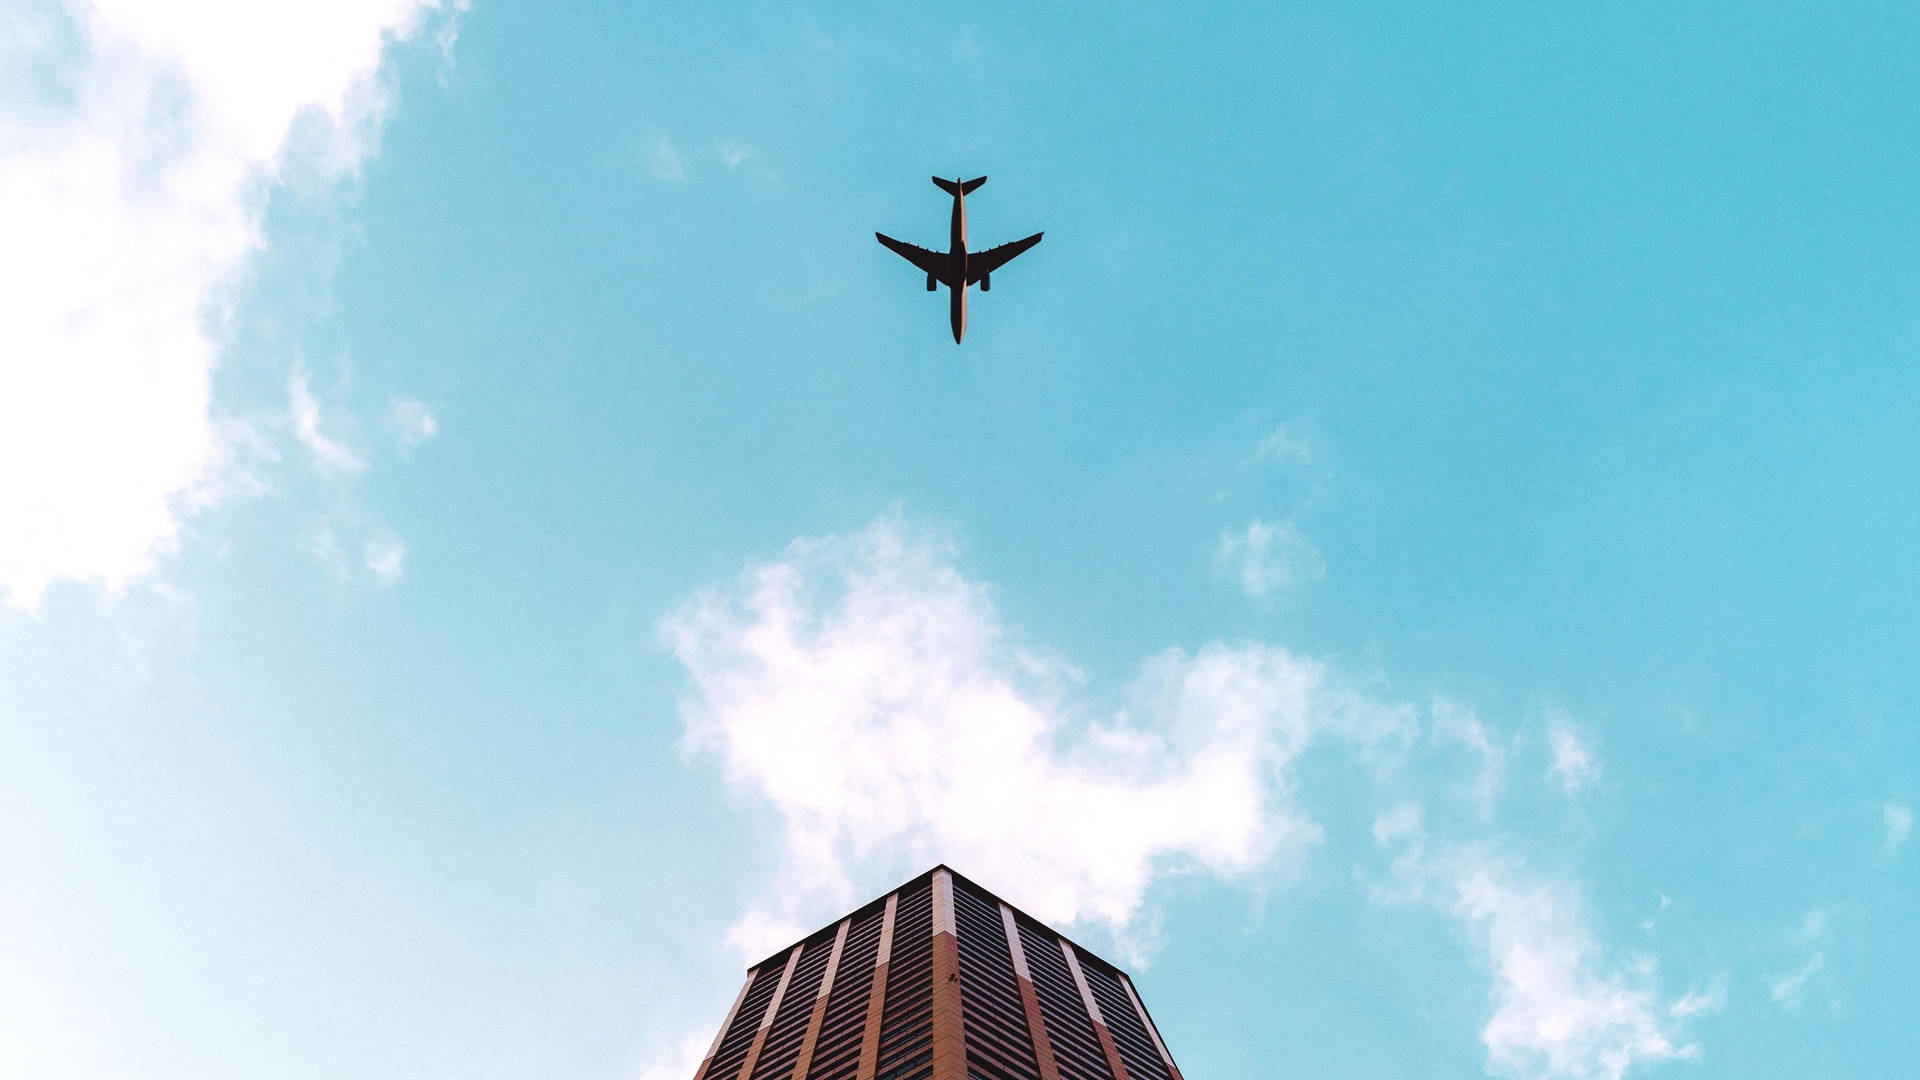 Hd Plane Flying Over Building